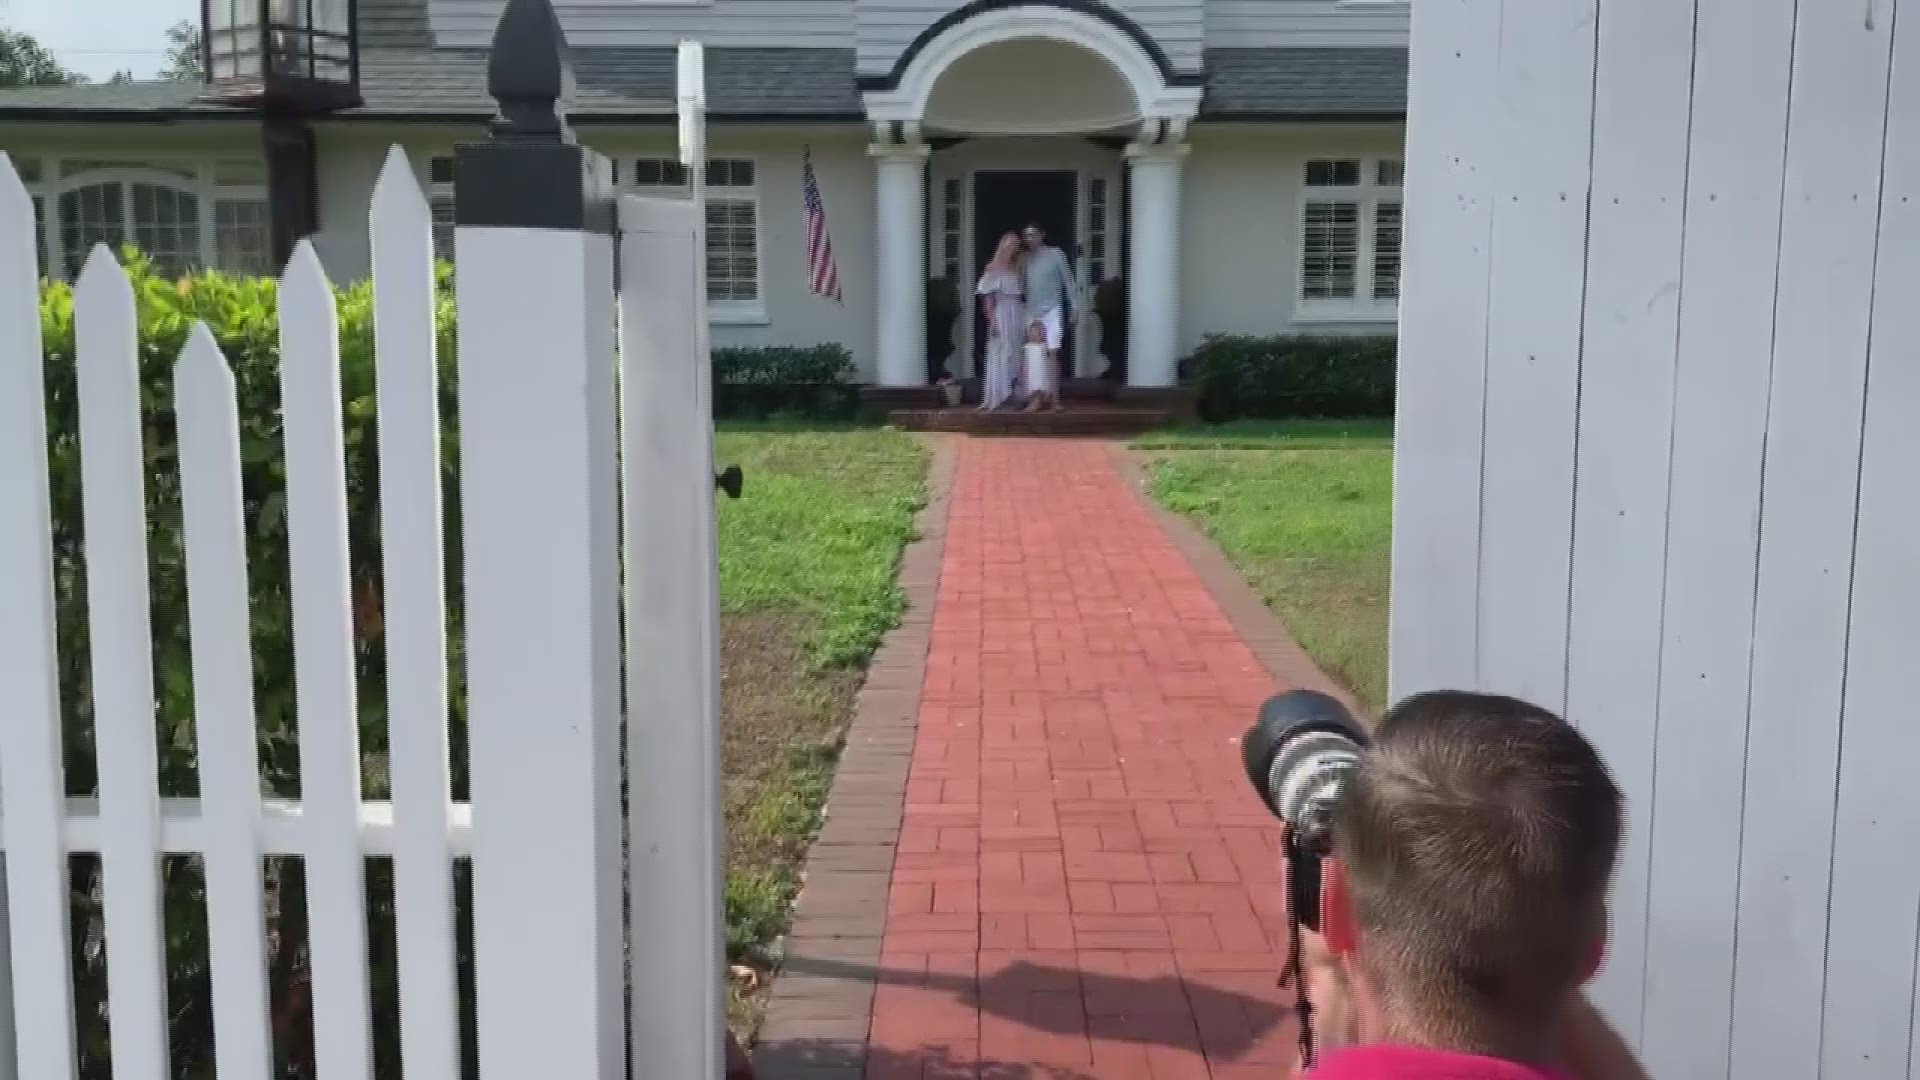 Jeremy and Tara Quellhorst wanted to do something to help their neighbors. On Easter Sunday, they walked their Snell Shores neighborhood and took family portraits.